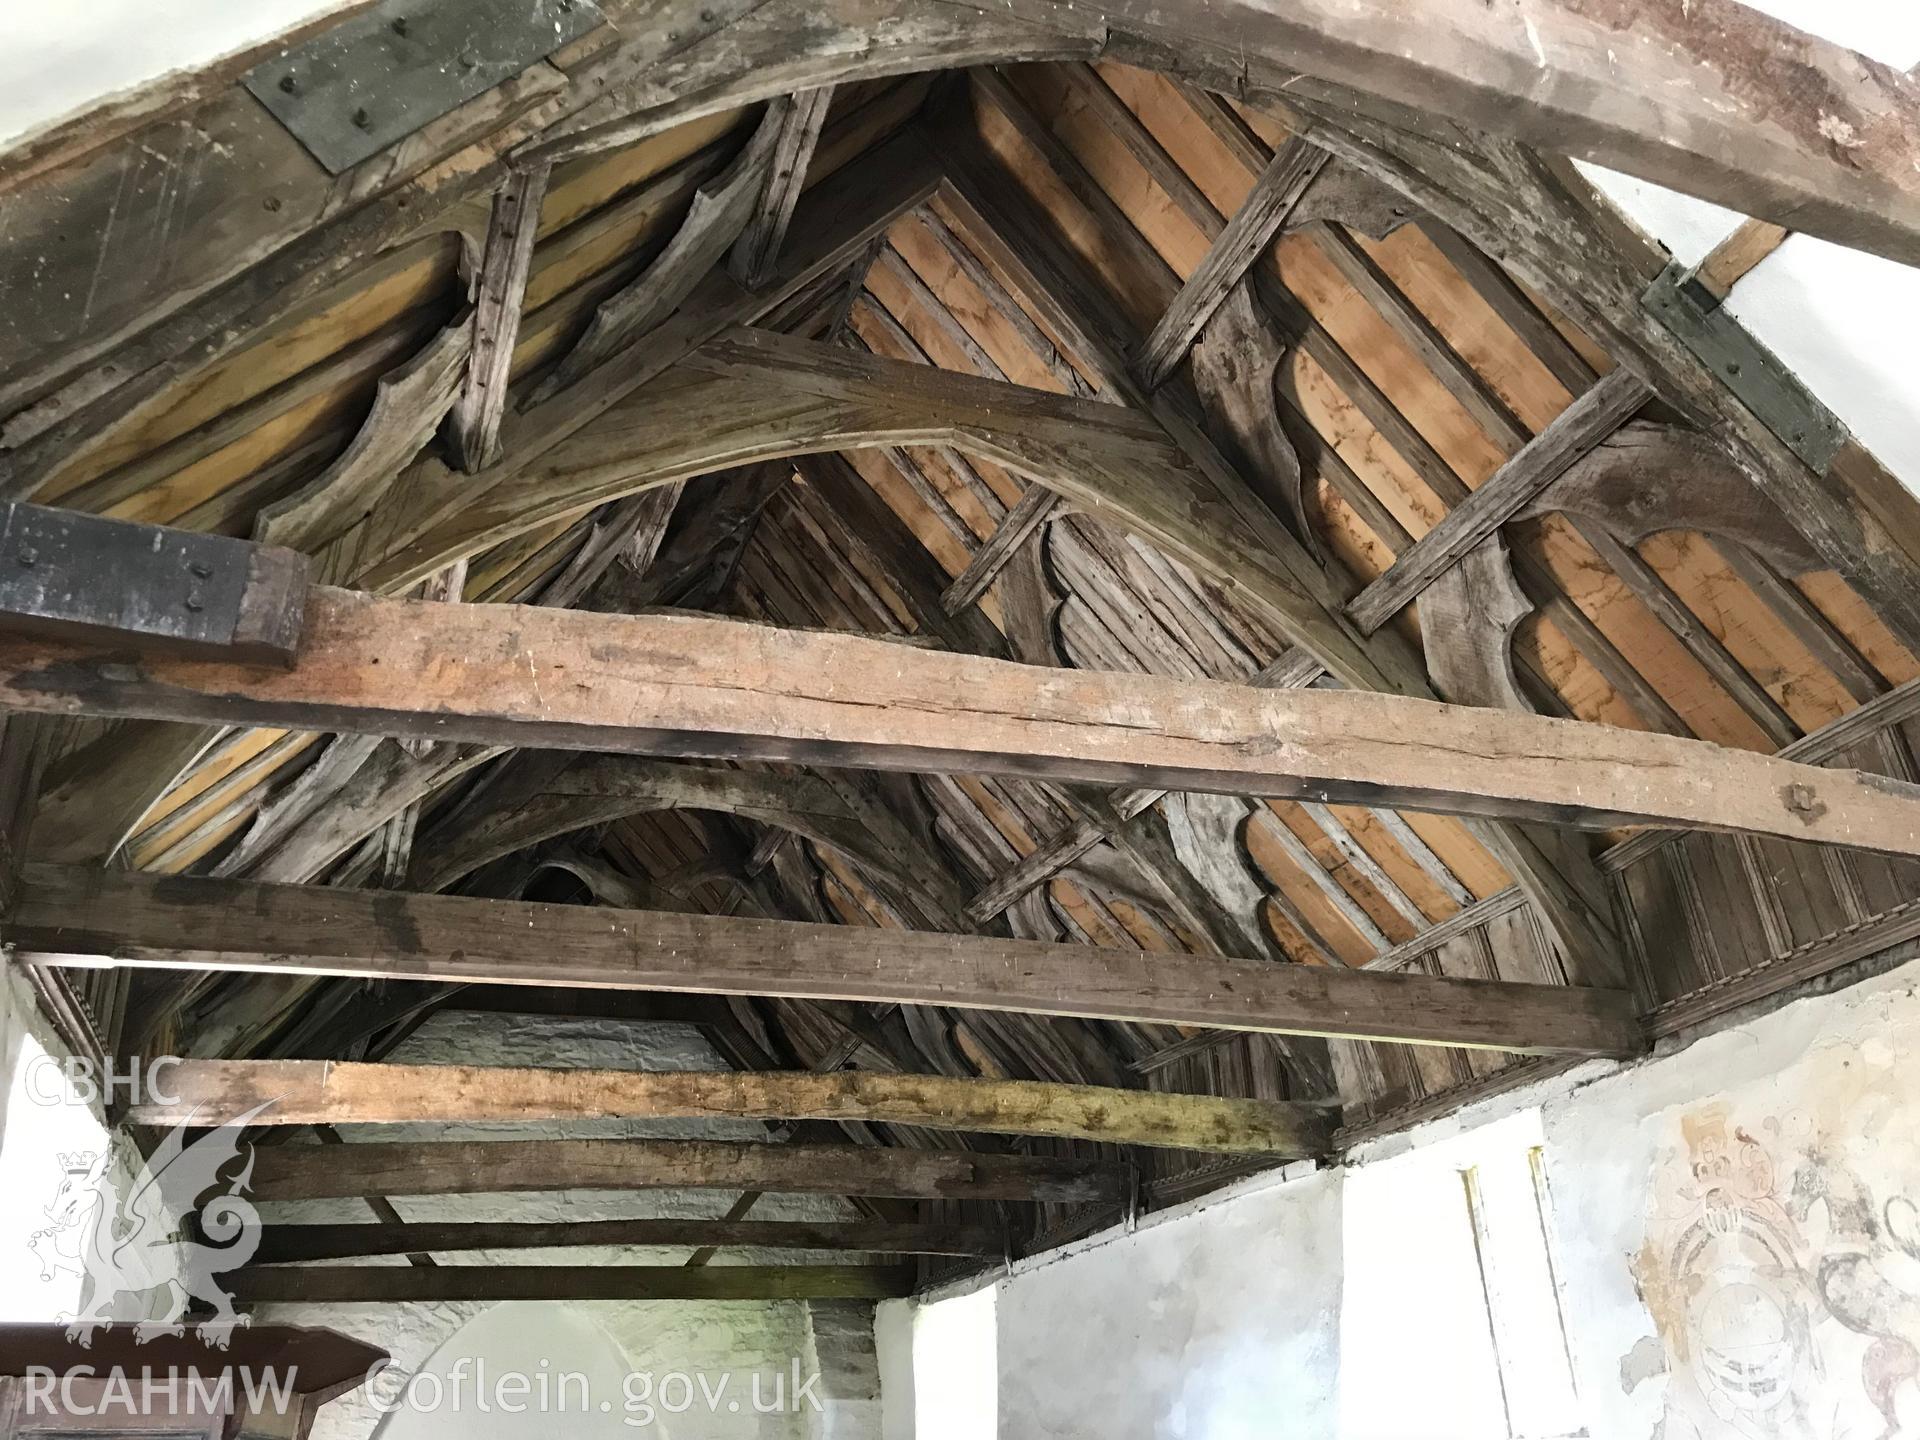 Colour photo showing interior view of the roof and a wall painting at St. Cewydd's Church, Diserth, taken by Paul R. Davis, 19th May 2018.